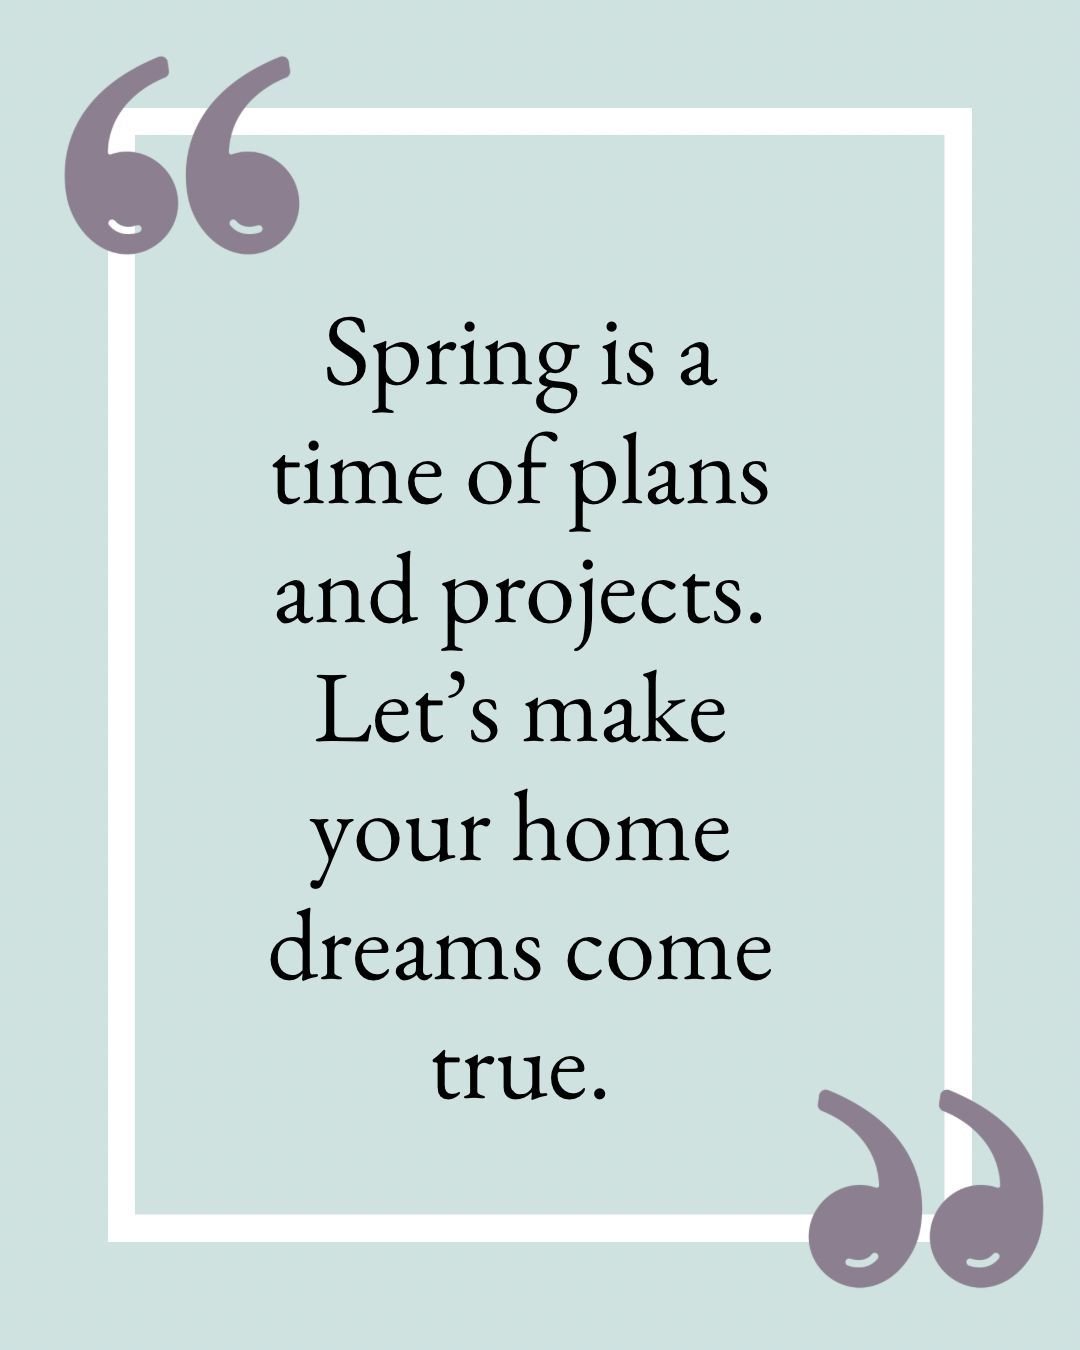 🌸 Dreaming of a New Beginning This Spring? 
 
As the world bursts into bloom, let&rsquo;s channel that renewal into finding your dream home! 
 
Spring is a time of plans and projects&mdash;what better project than turning your home dreams into reali